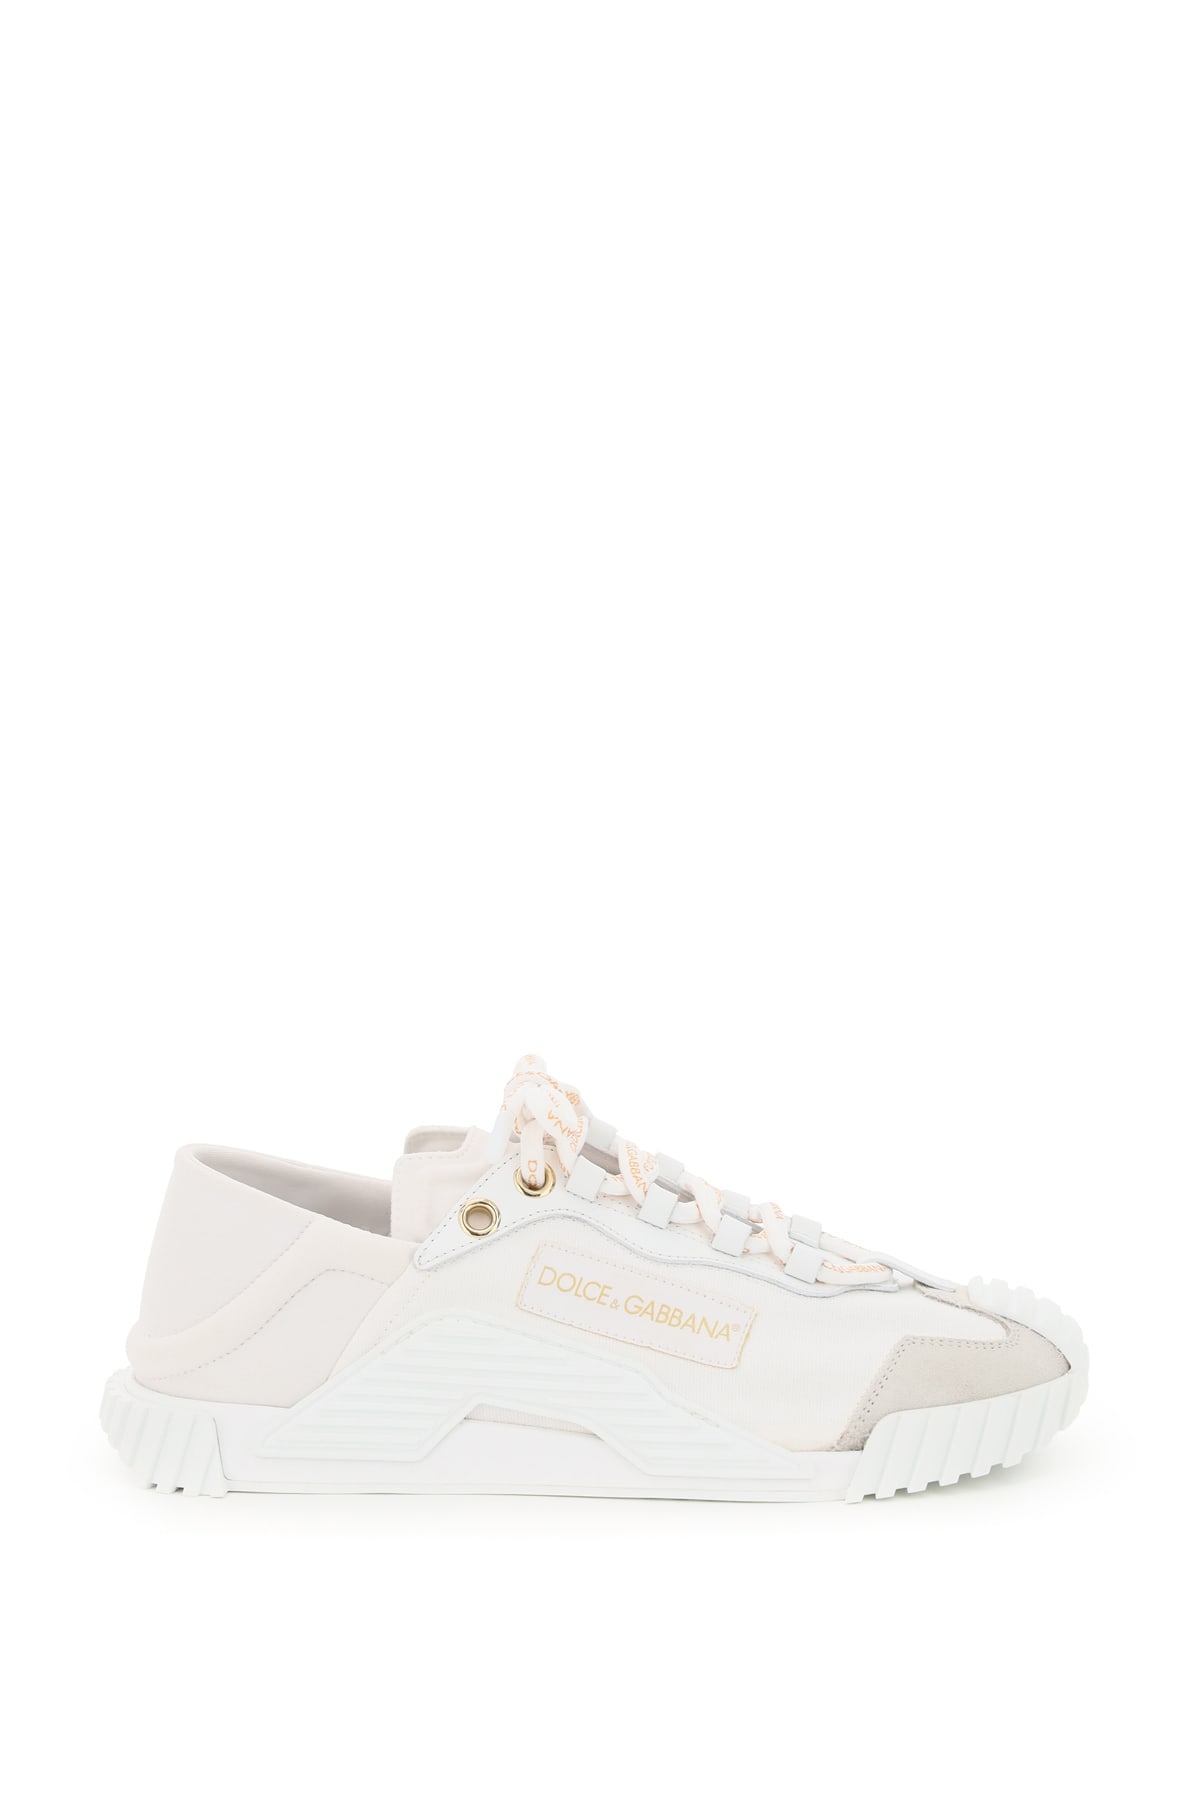 Dolce & Gabbana Ns1 Canvas Sneakers